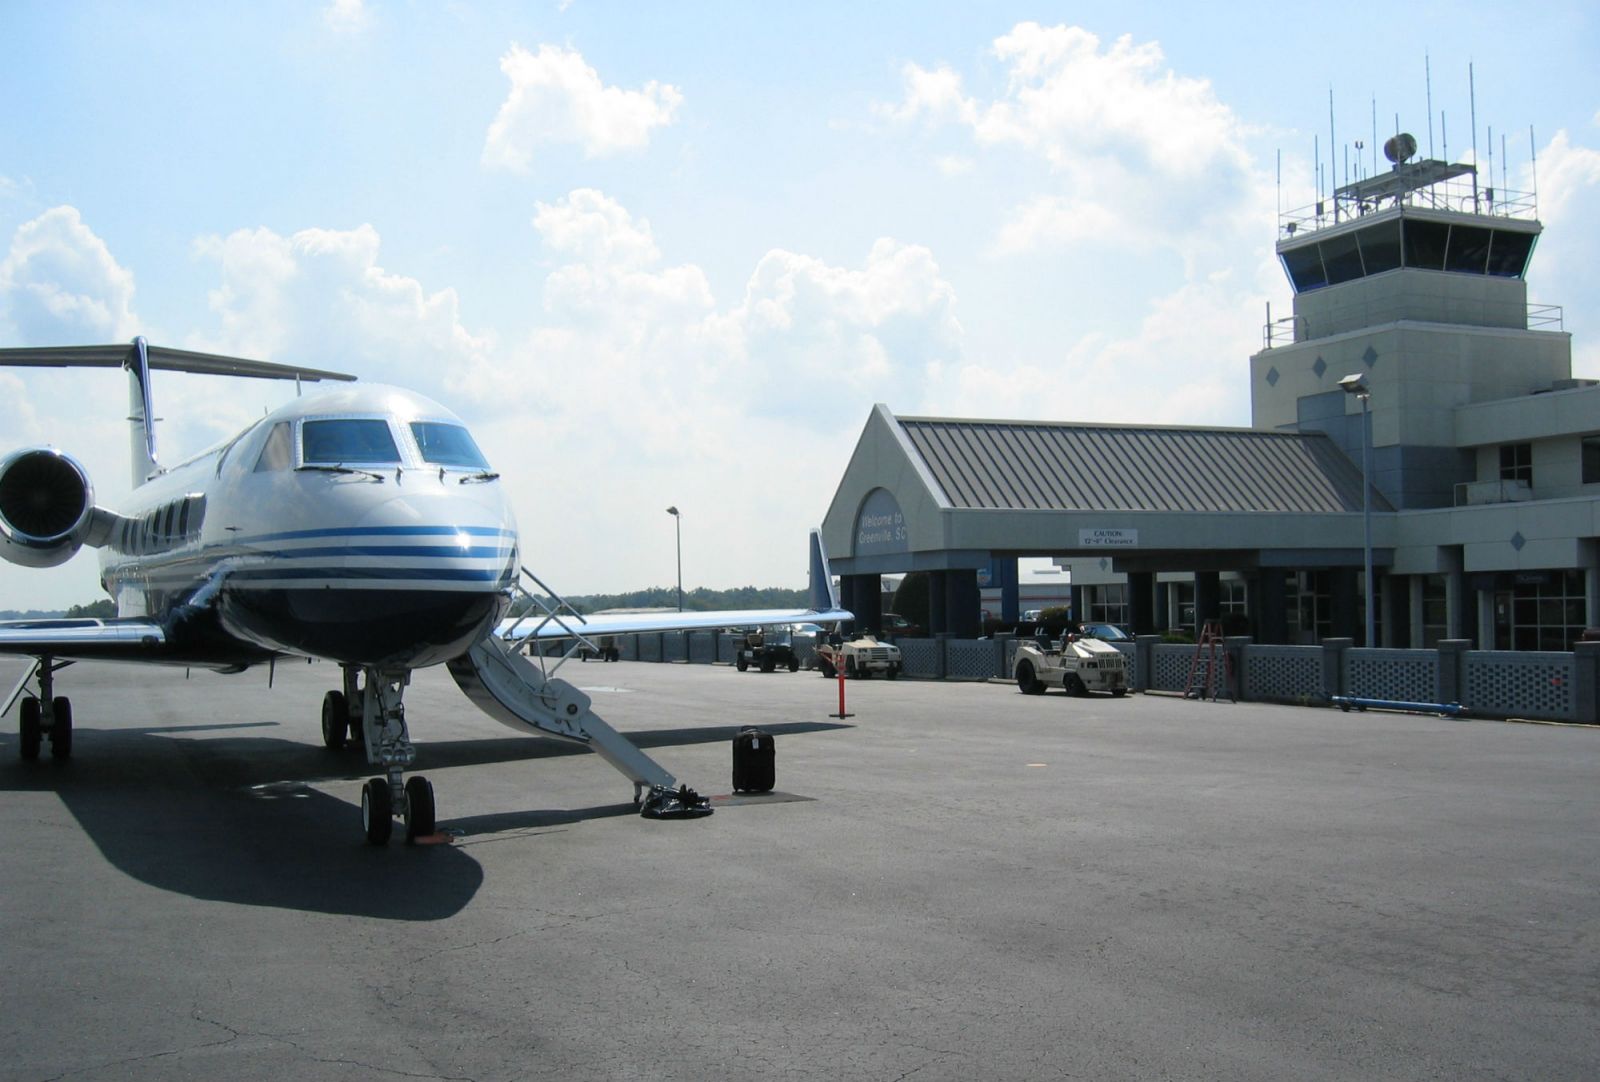 Greenville Downtown Airport is one of the busiest small airports in the state, with an economic impact of nearly $70 million. (Photo/Provided)